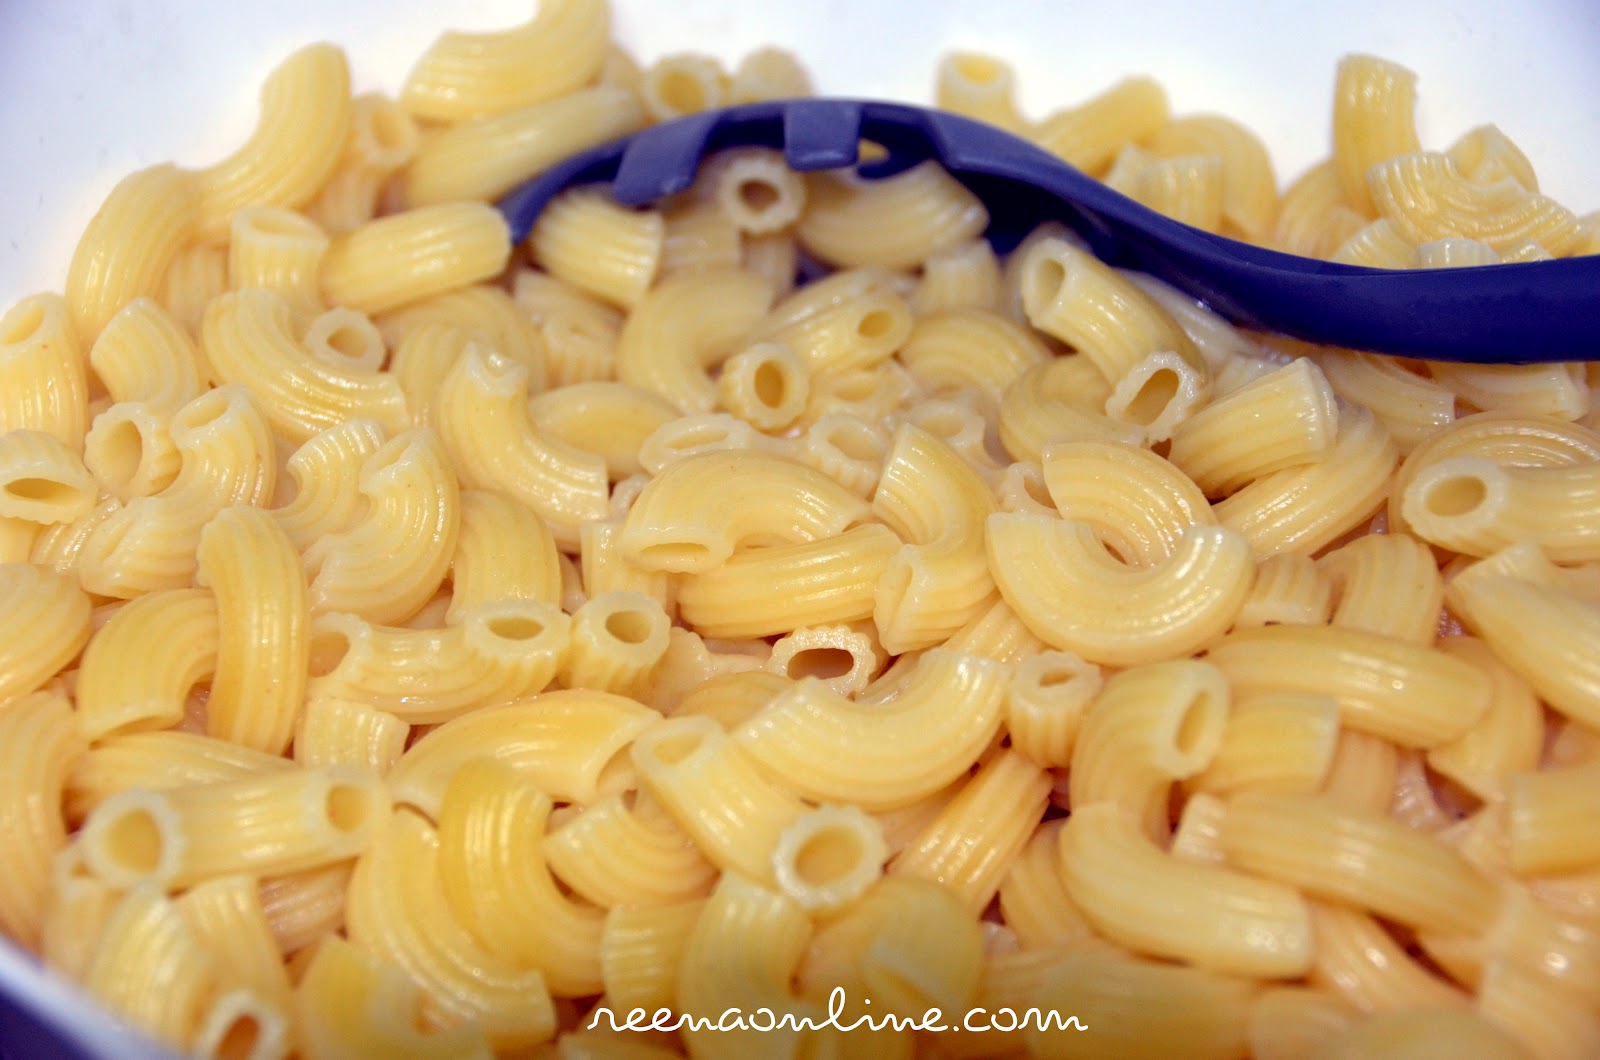 Reena's Online: Resepi : Baked Macaroni and Cheese